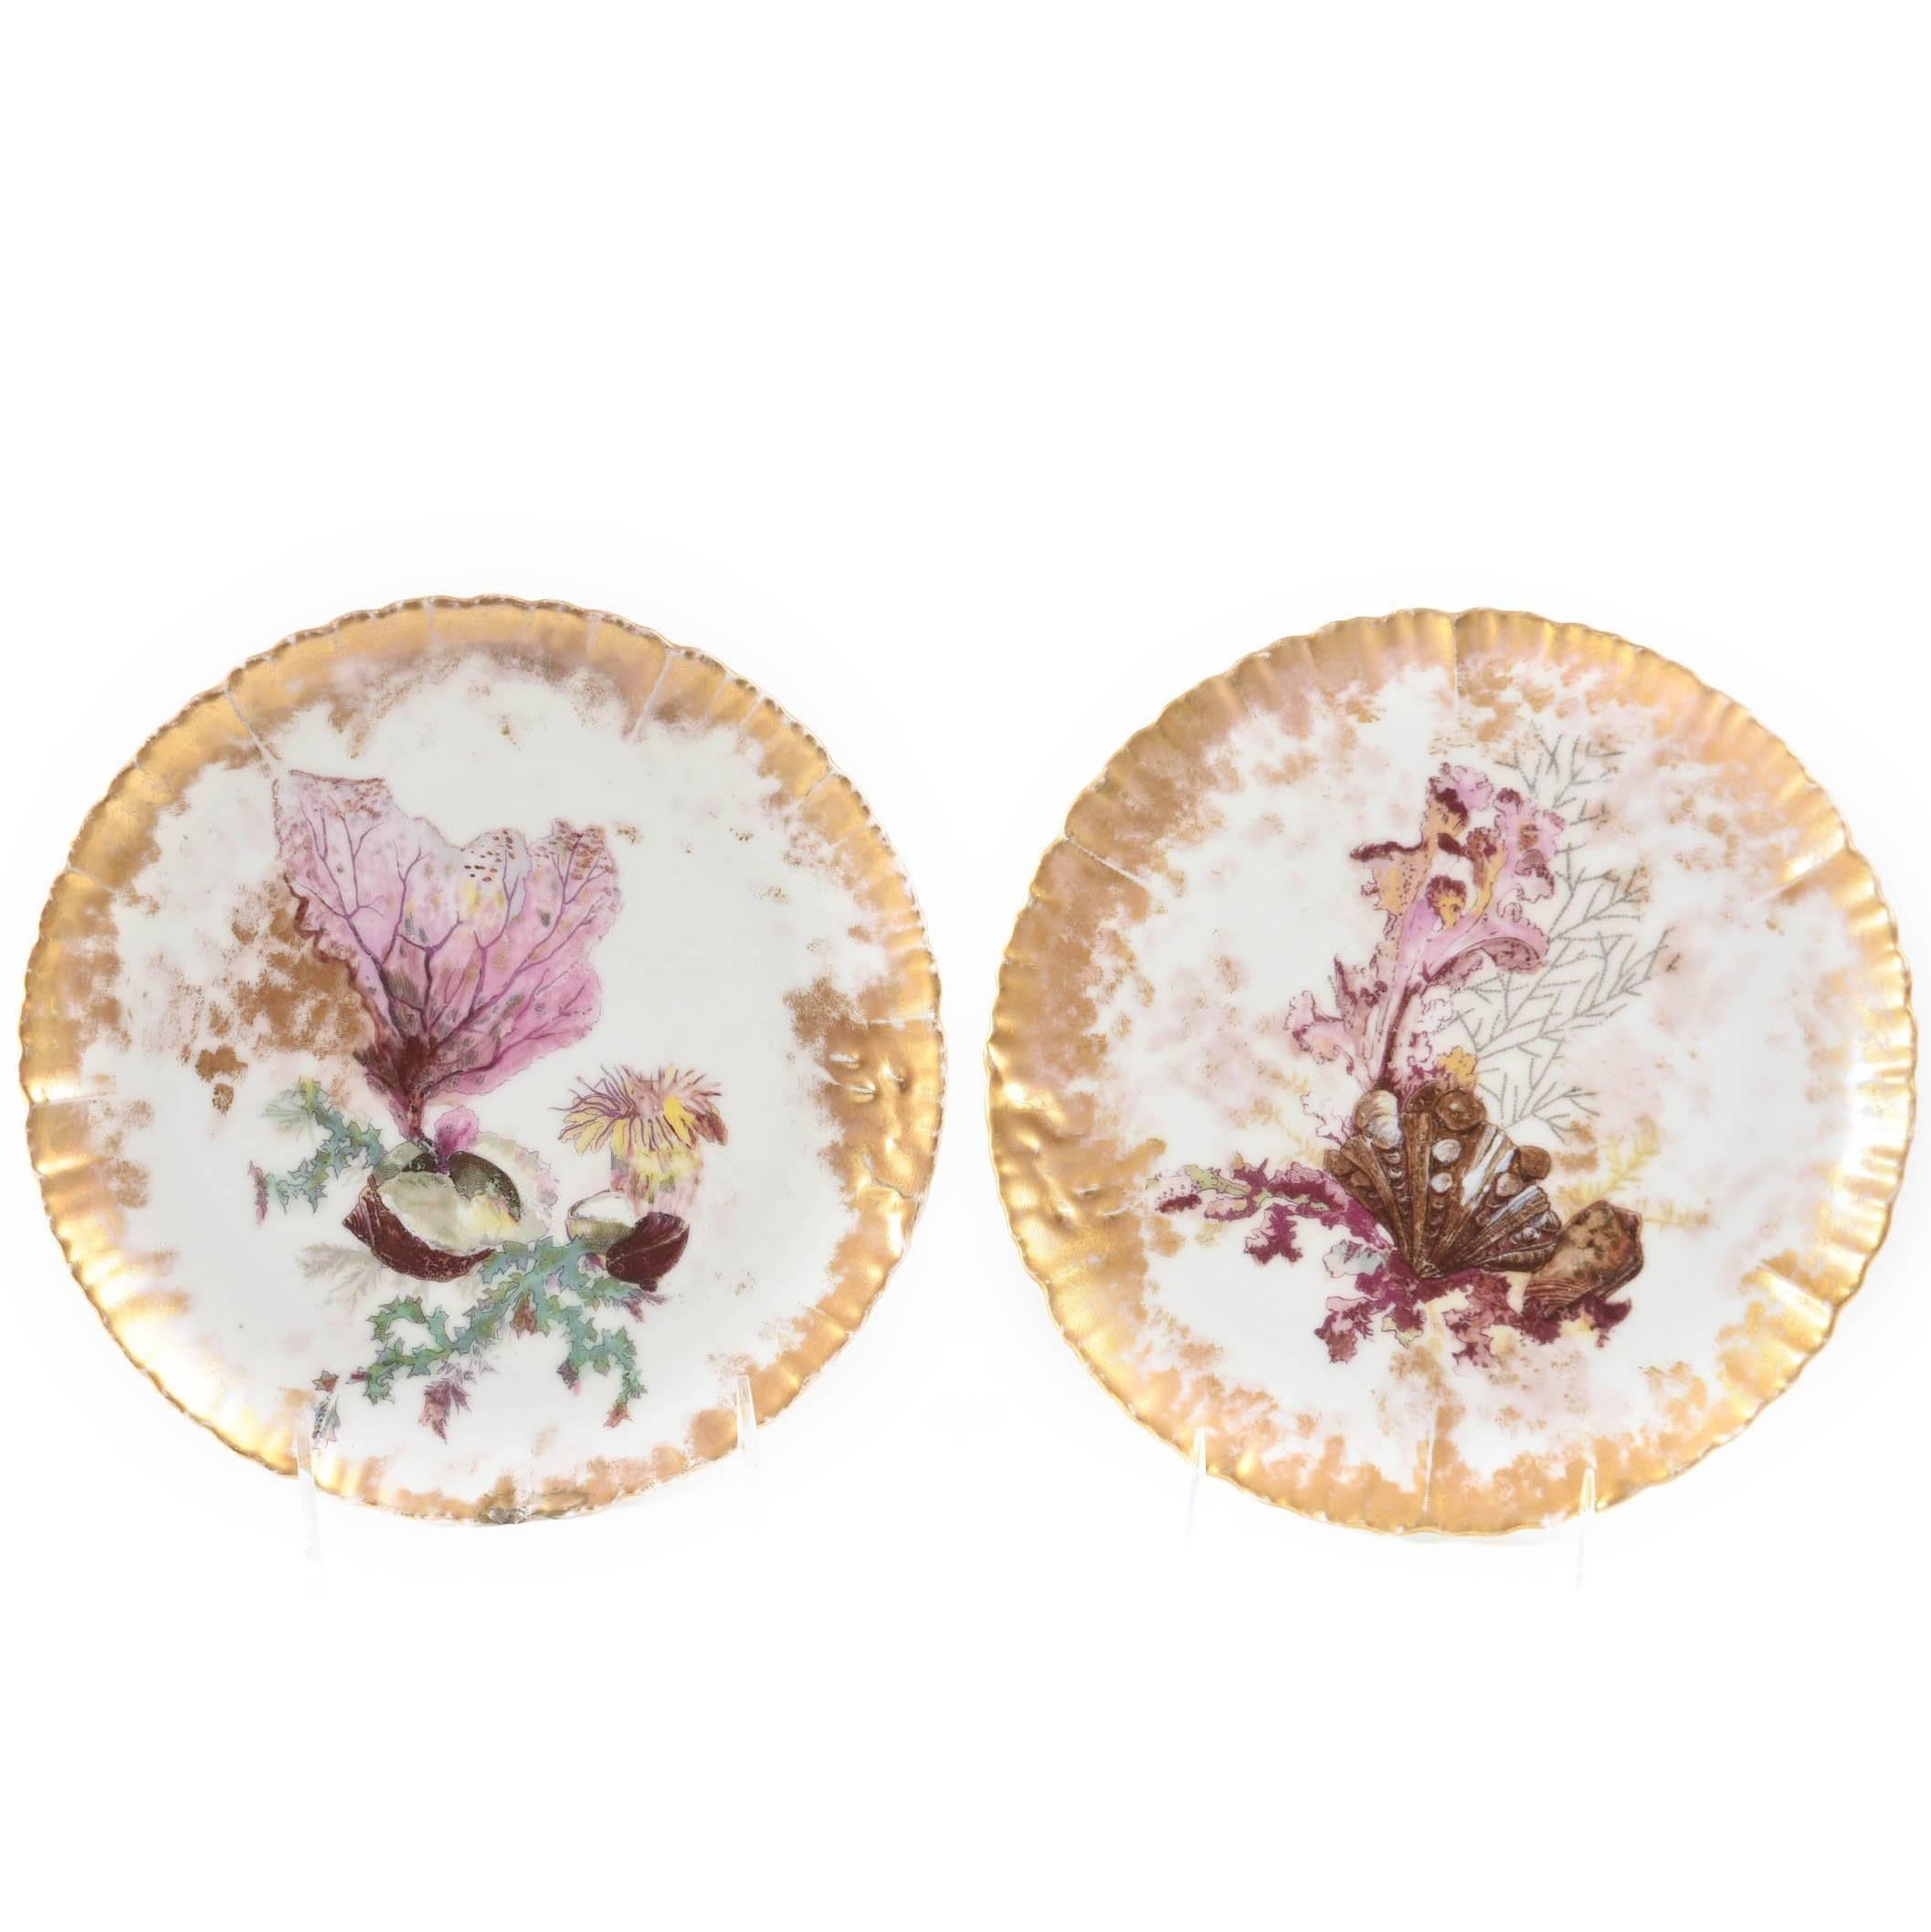 Pair of Antique French "Shell" Plates, Gilded Edges Aesthetic Style Great Design